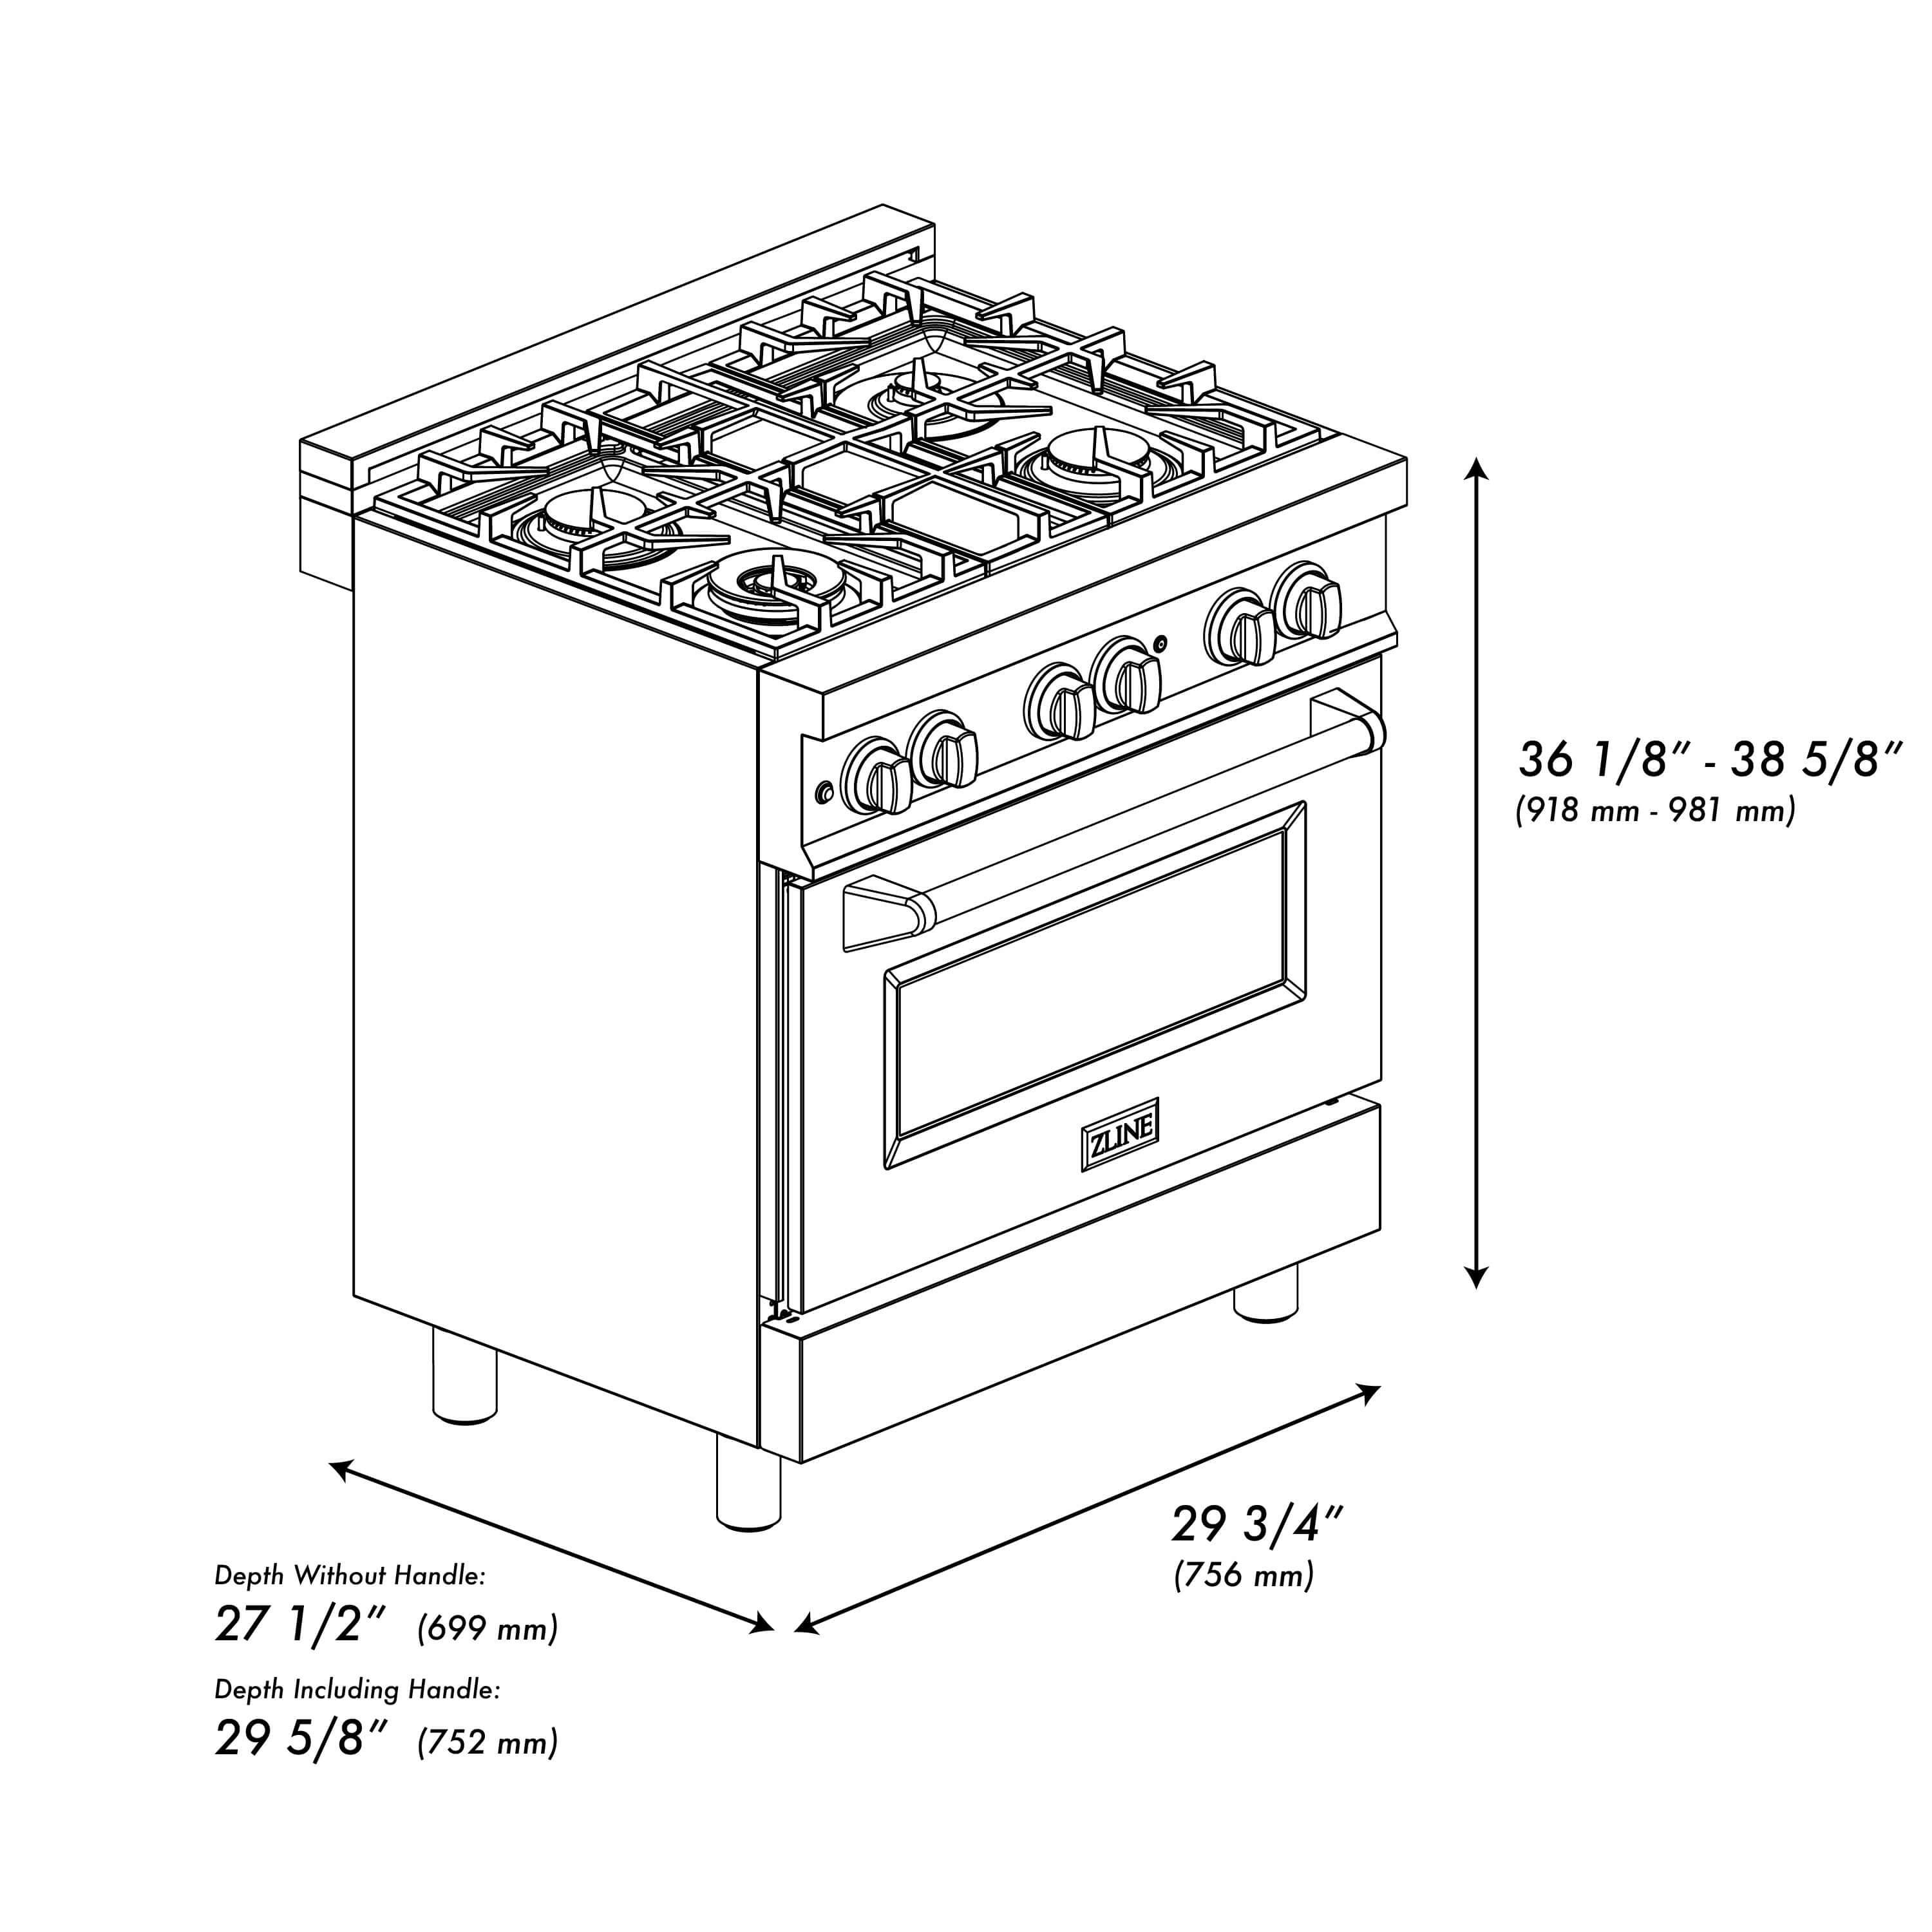 ZLINE 30 in. 4.0 cu. ft. Dual Fuel Range with Gas Stove and Electric Oven in Fingerprint Resistant Stainless Steel (RA-SN-30)